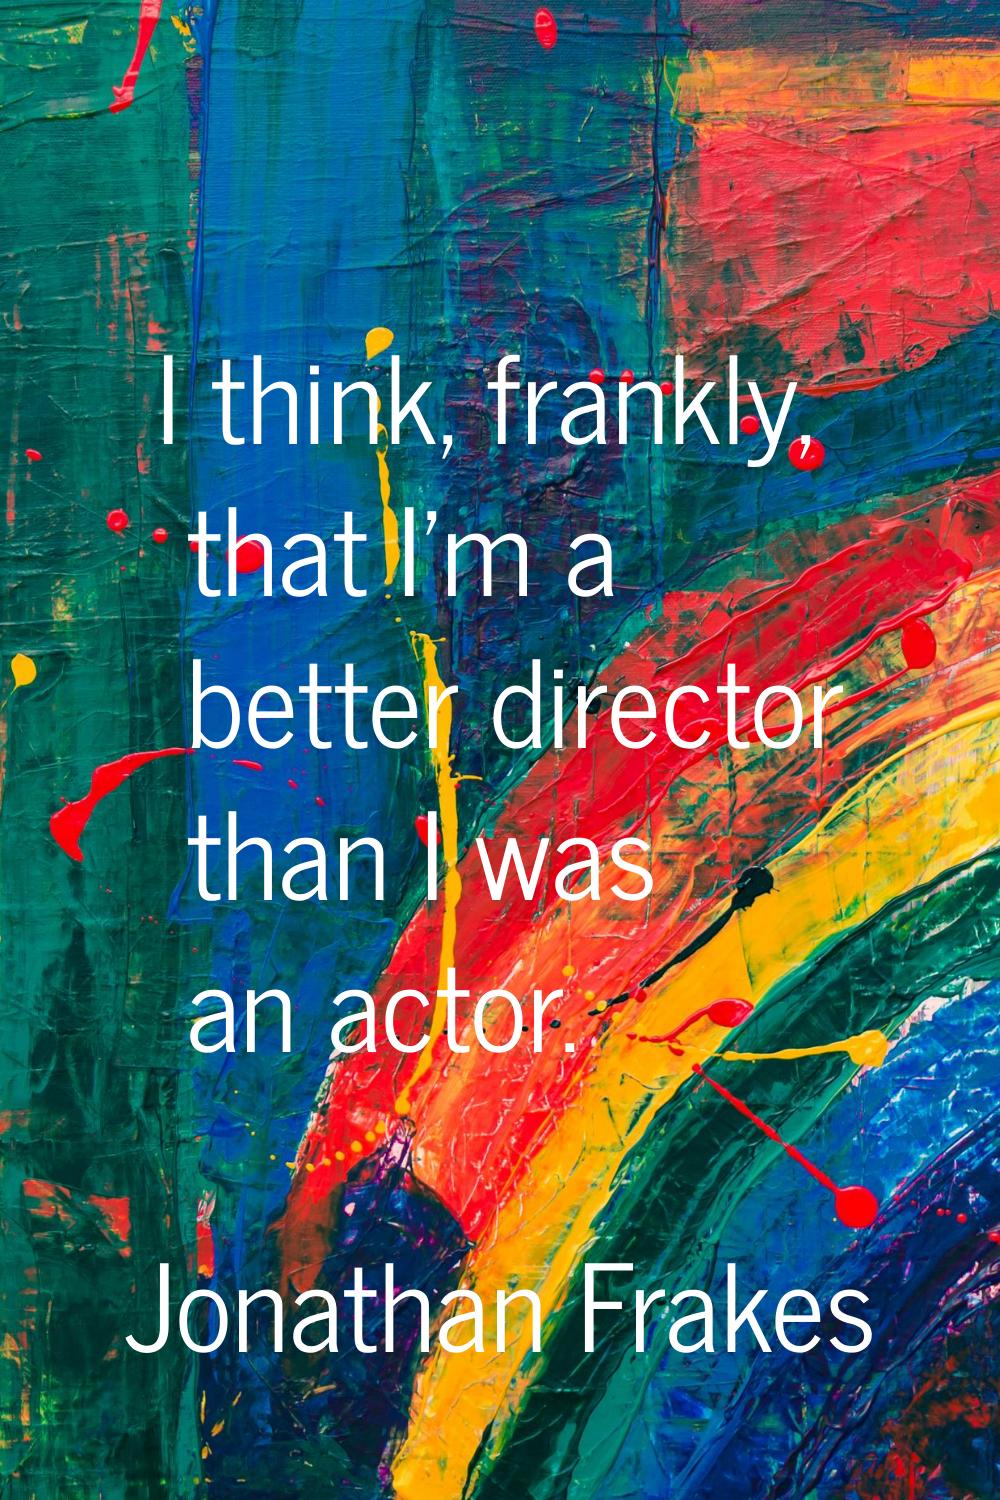 I think, frankly, that I'm a better director than I was an actor.